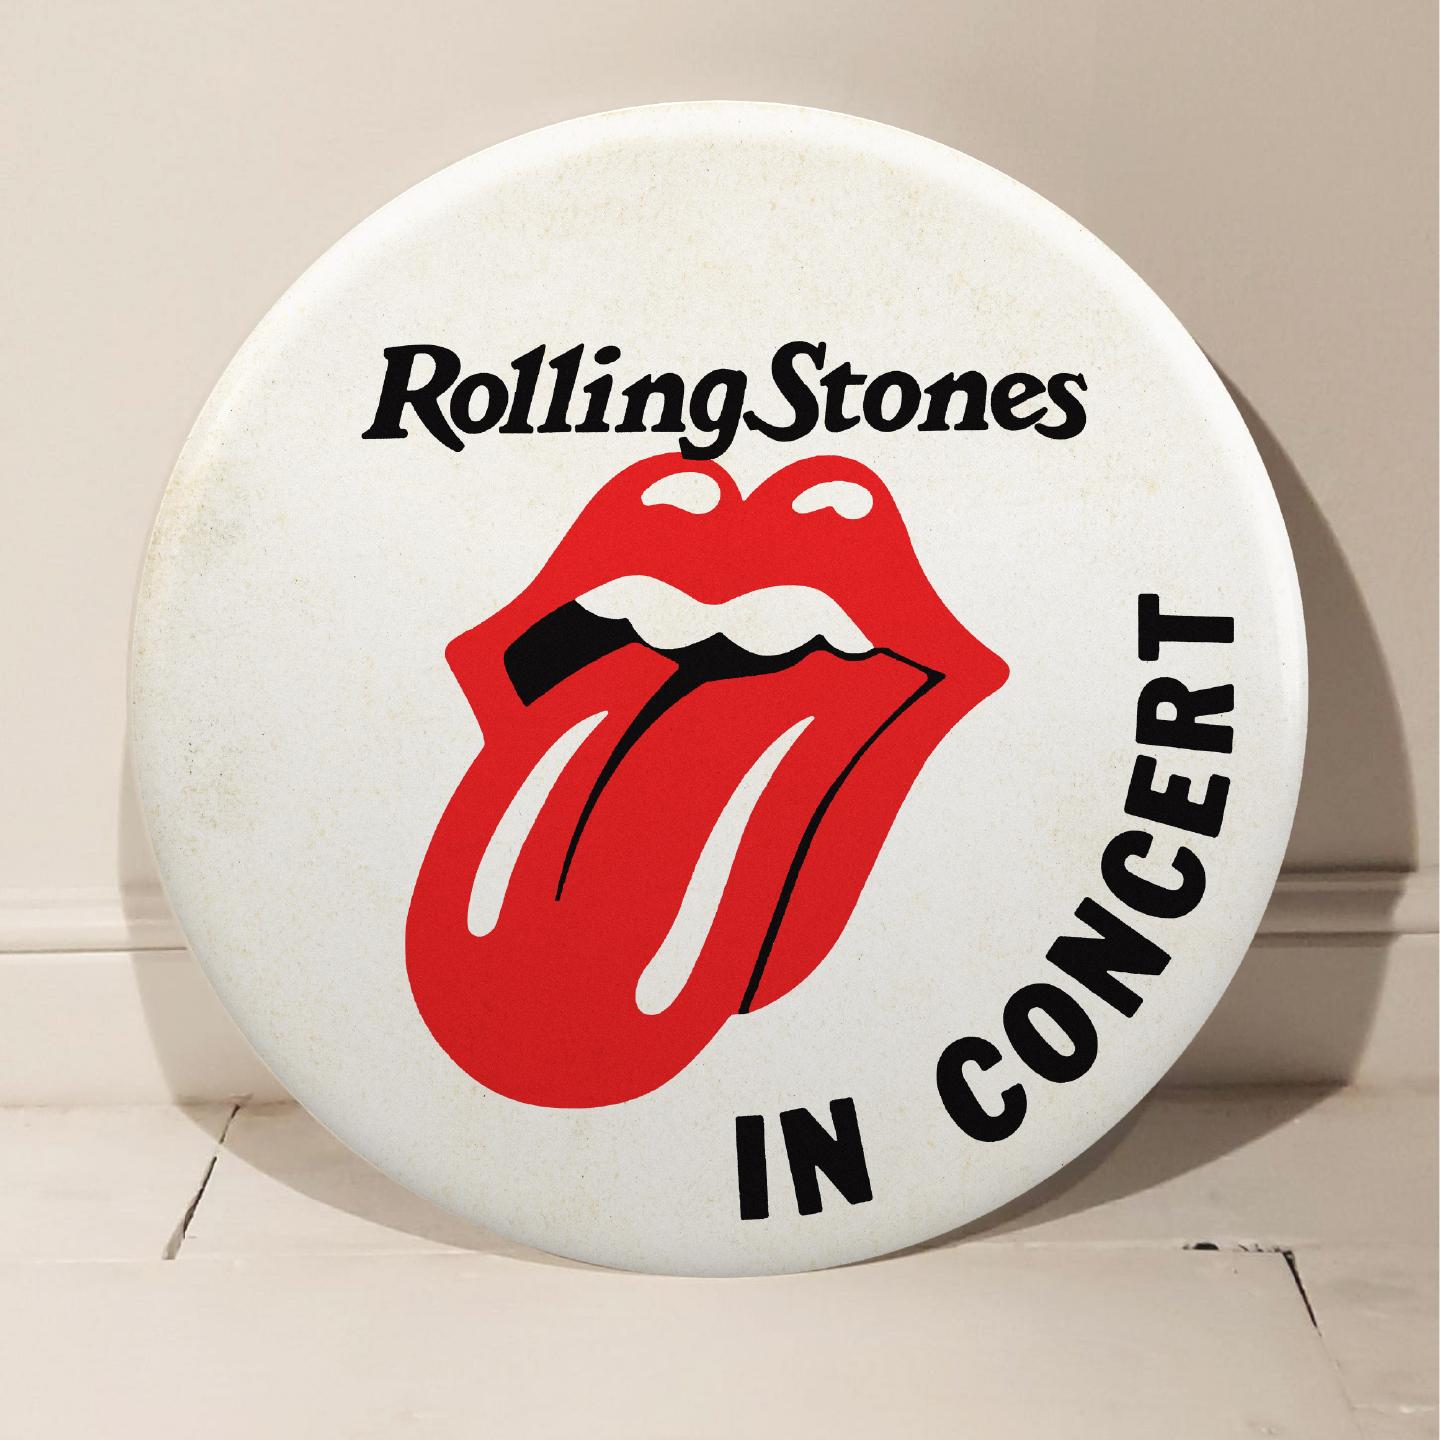 Rolling Stones Giant Handmade 3D Vintage Button - Art by Tony Dennis